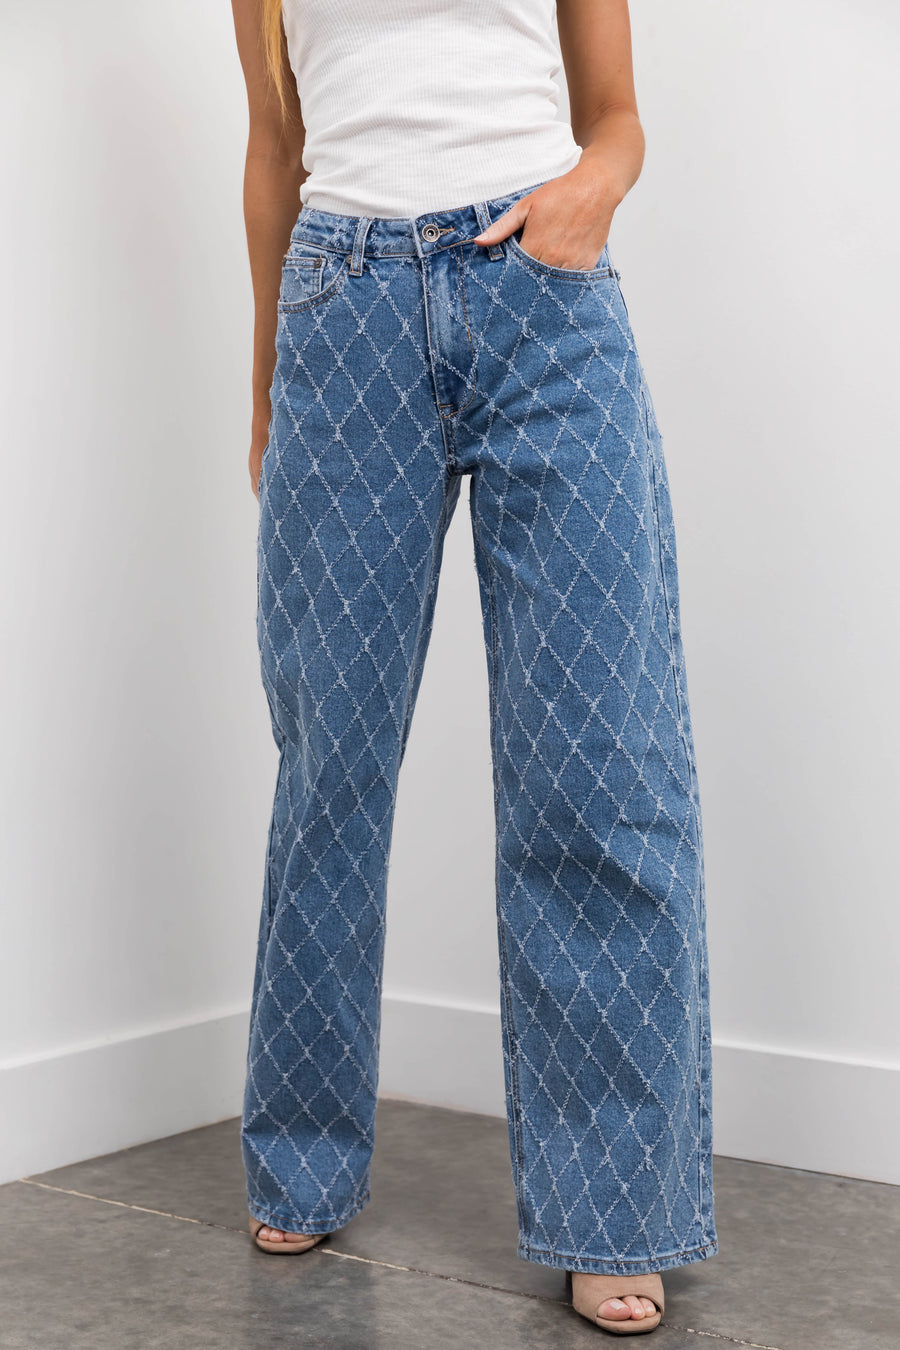 Special A Medium Wash Quilted Pattern Jeans